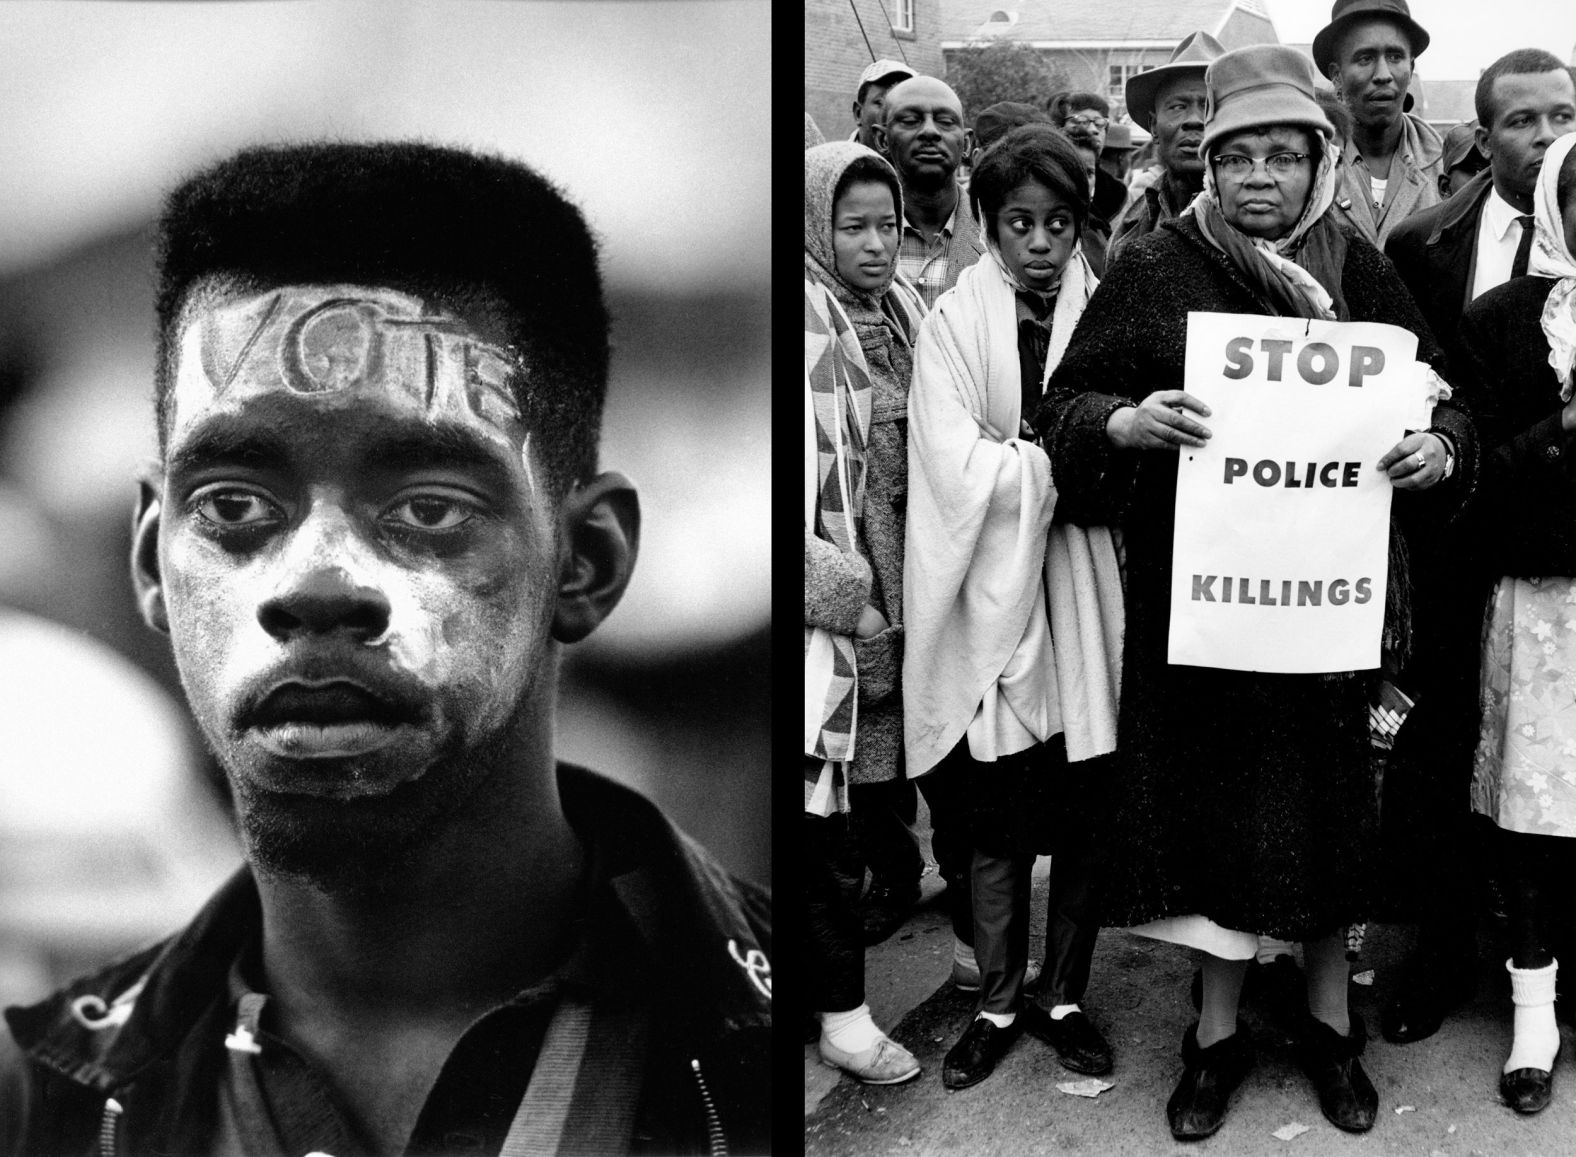 At left, a young activist wears white face paint reading "vote" as he takes part in a Selma to Montgomery march in 1965. At right, a woman at the march holds a sign that says "stop police killings." Schapiro's civil rights photos "bring us an intimacy and stillness that connect us profoundly with their subjects," Ahern said. "He made photos that informed, but he also made us <em>feel</em> — a byproduct of his remarkable talent but also of his own activism and point of view."